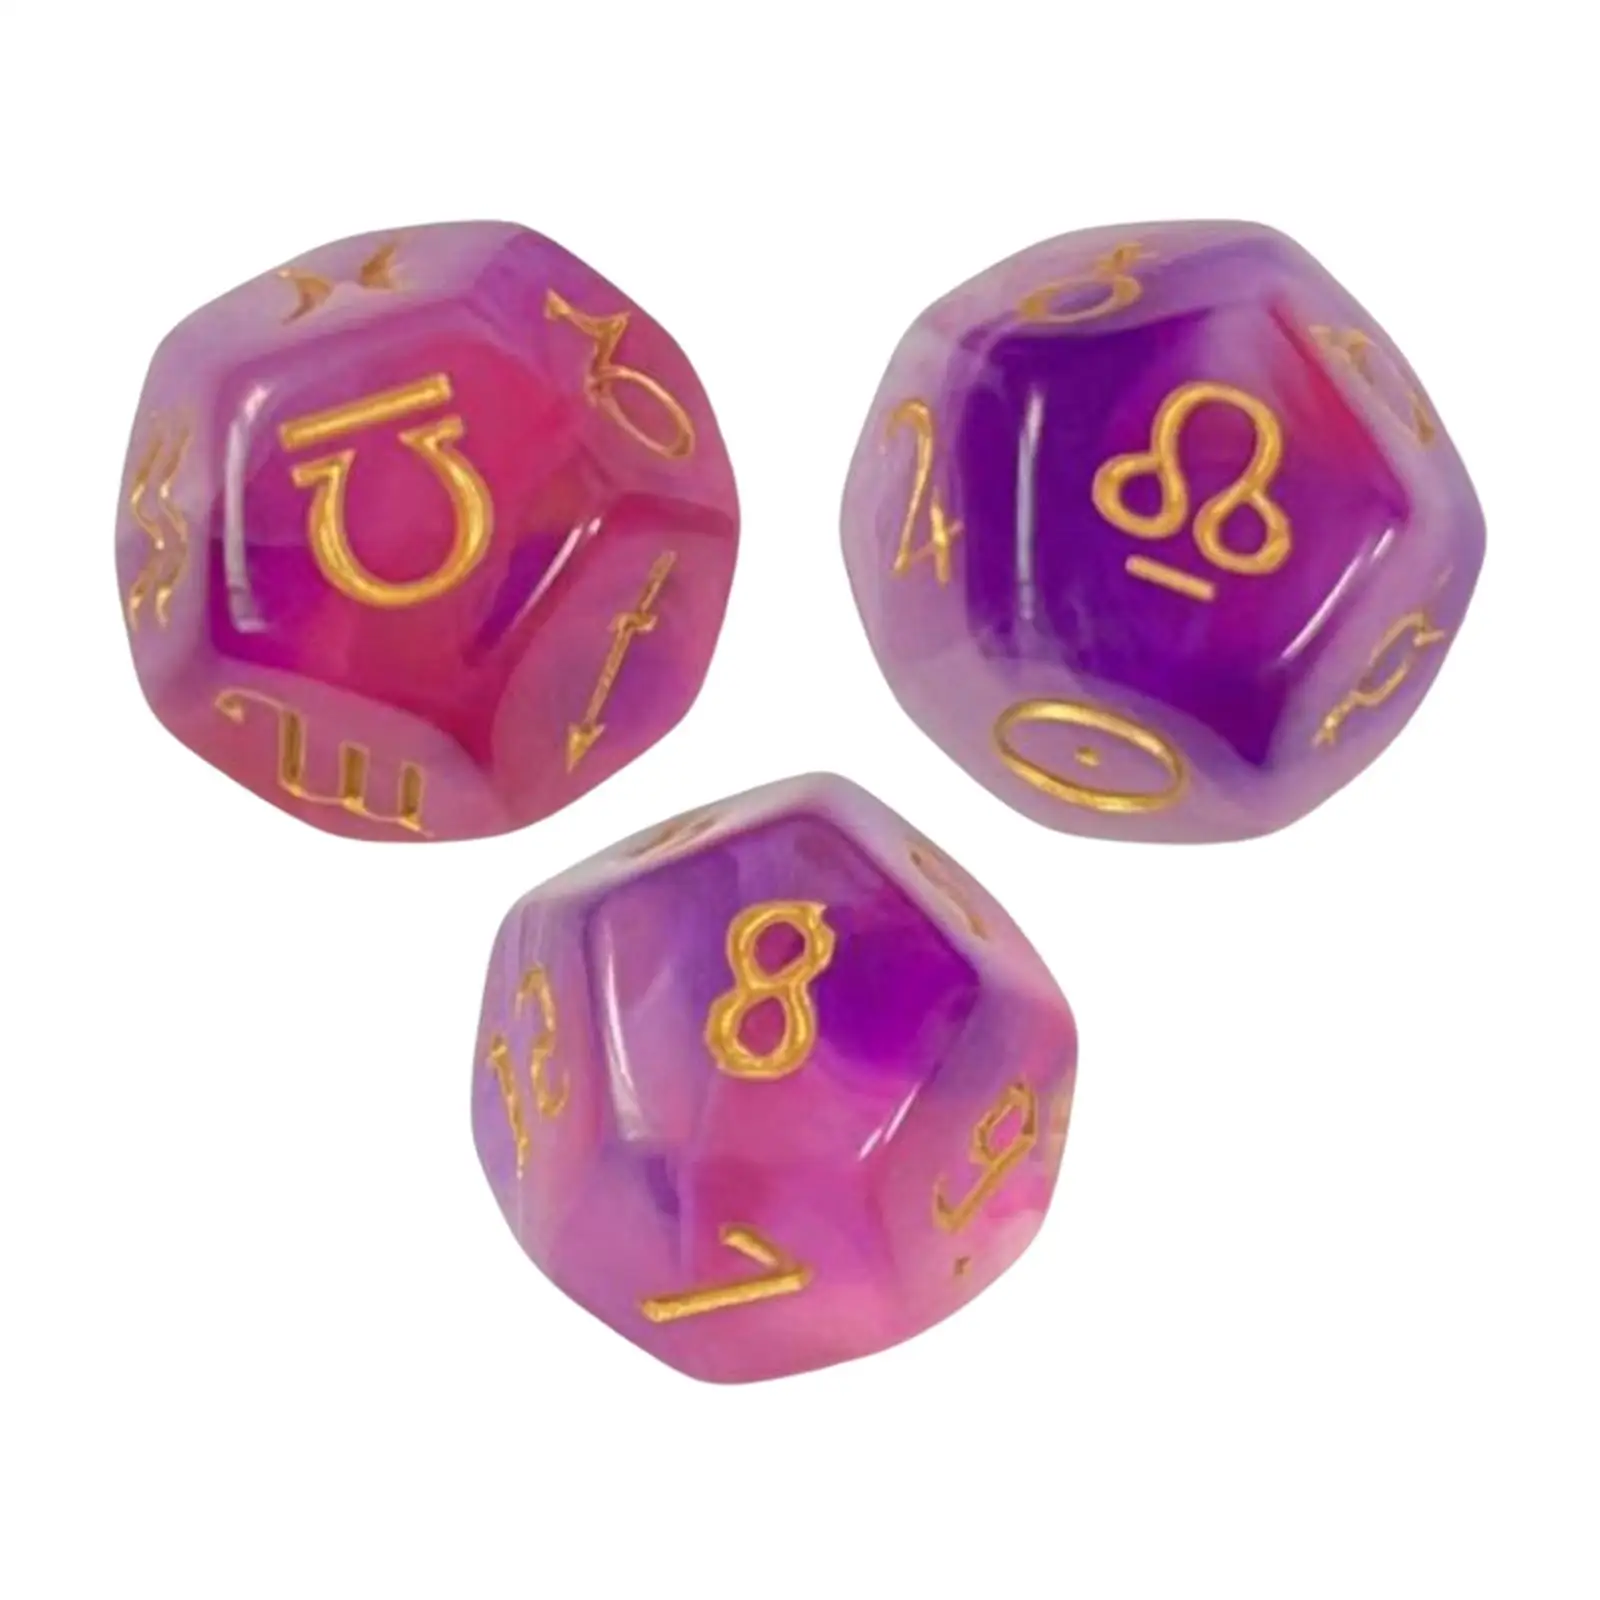 3 Pieces 12 Sided Astrology Dices Props Zodiac Astrology Planets Dice Set for Role Playing Board Games Dice Games Party Games